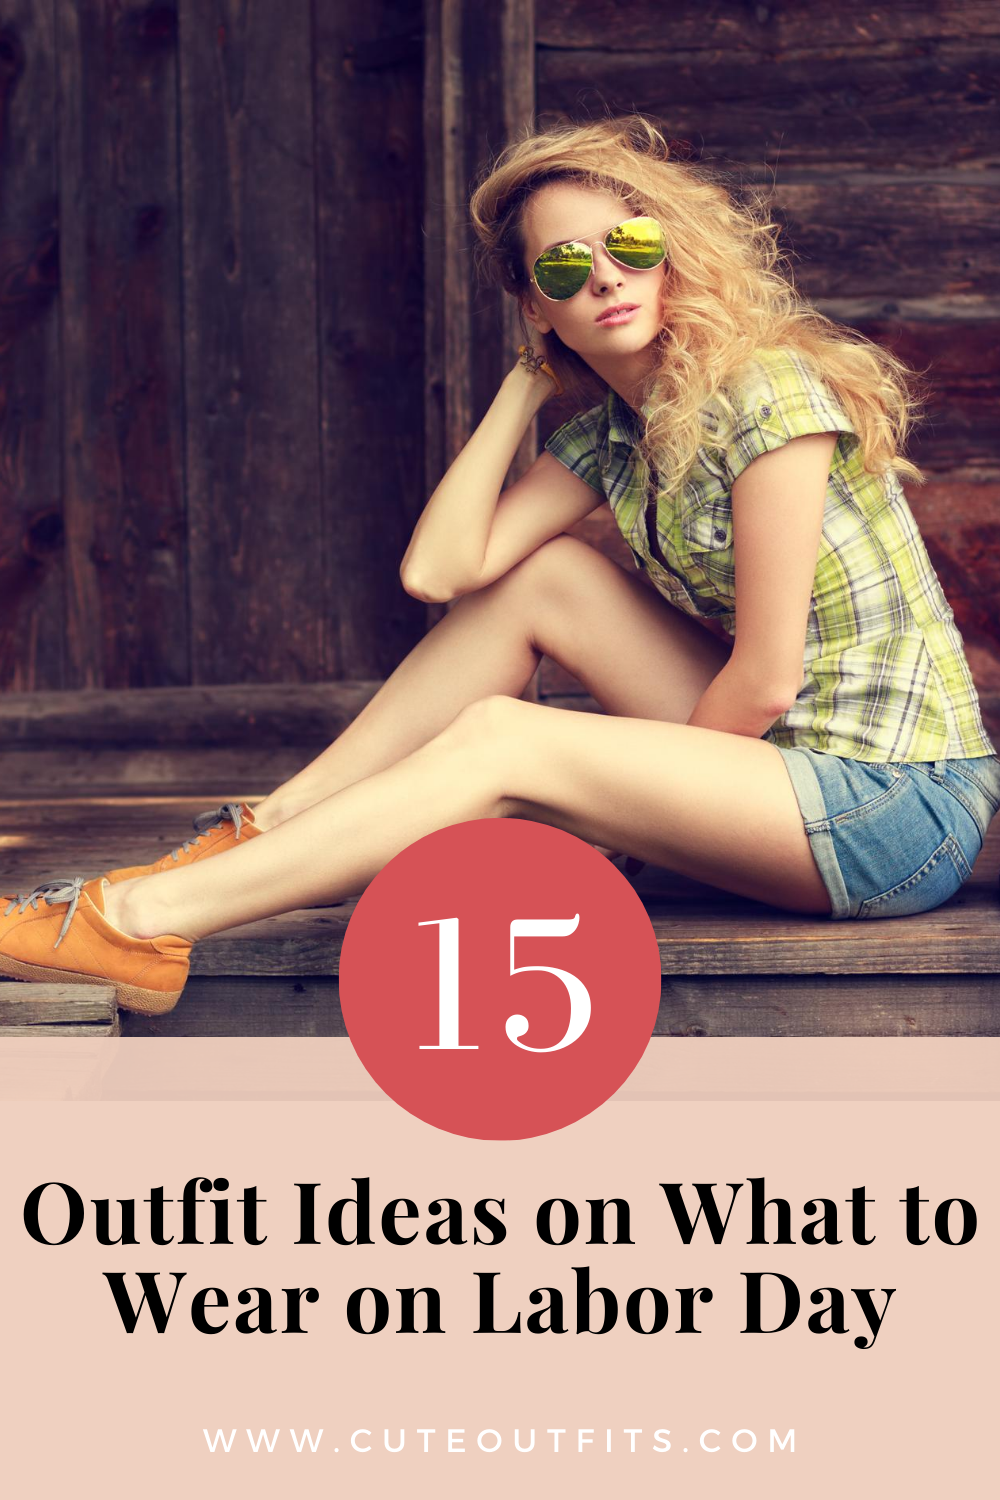 placard | Here Are 15 Outfit Ideas on What to Wear on Labor Day